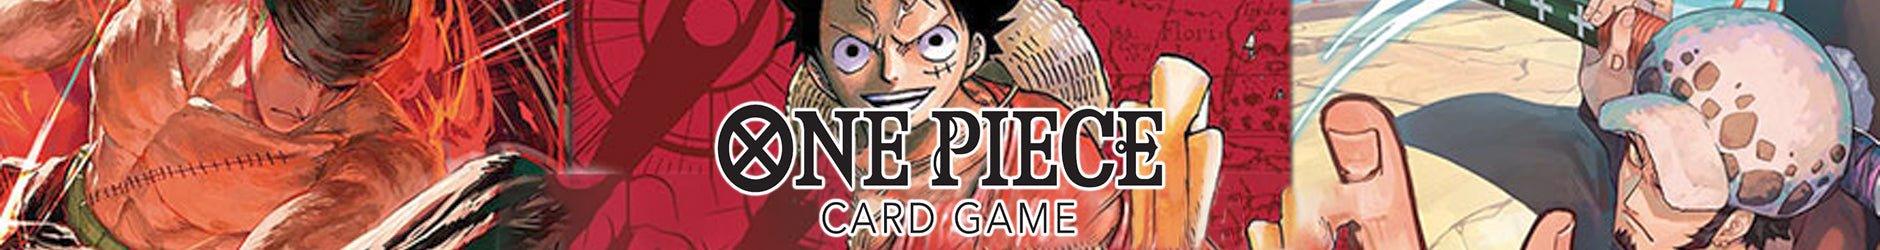 One Piece Latest Releases - Romulus Games